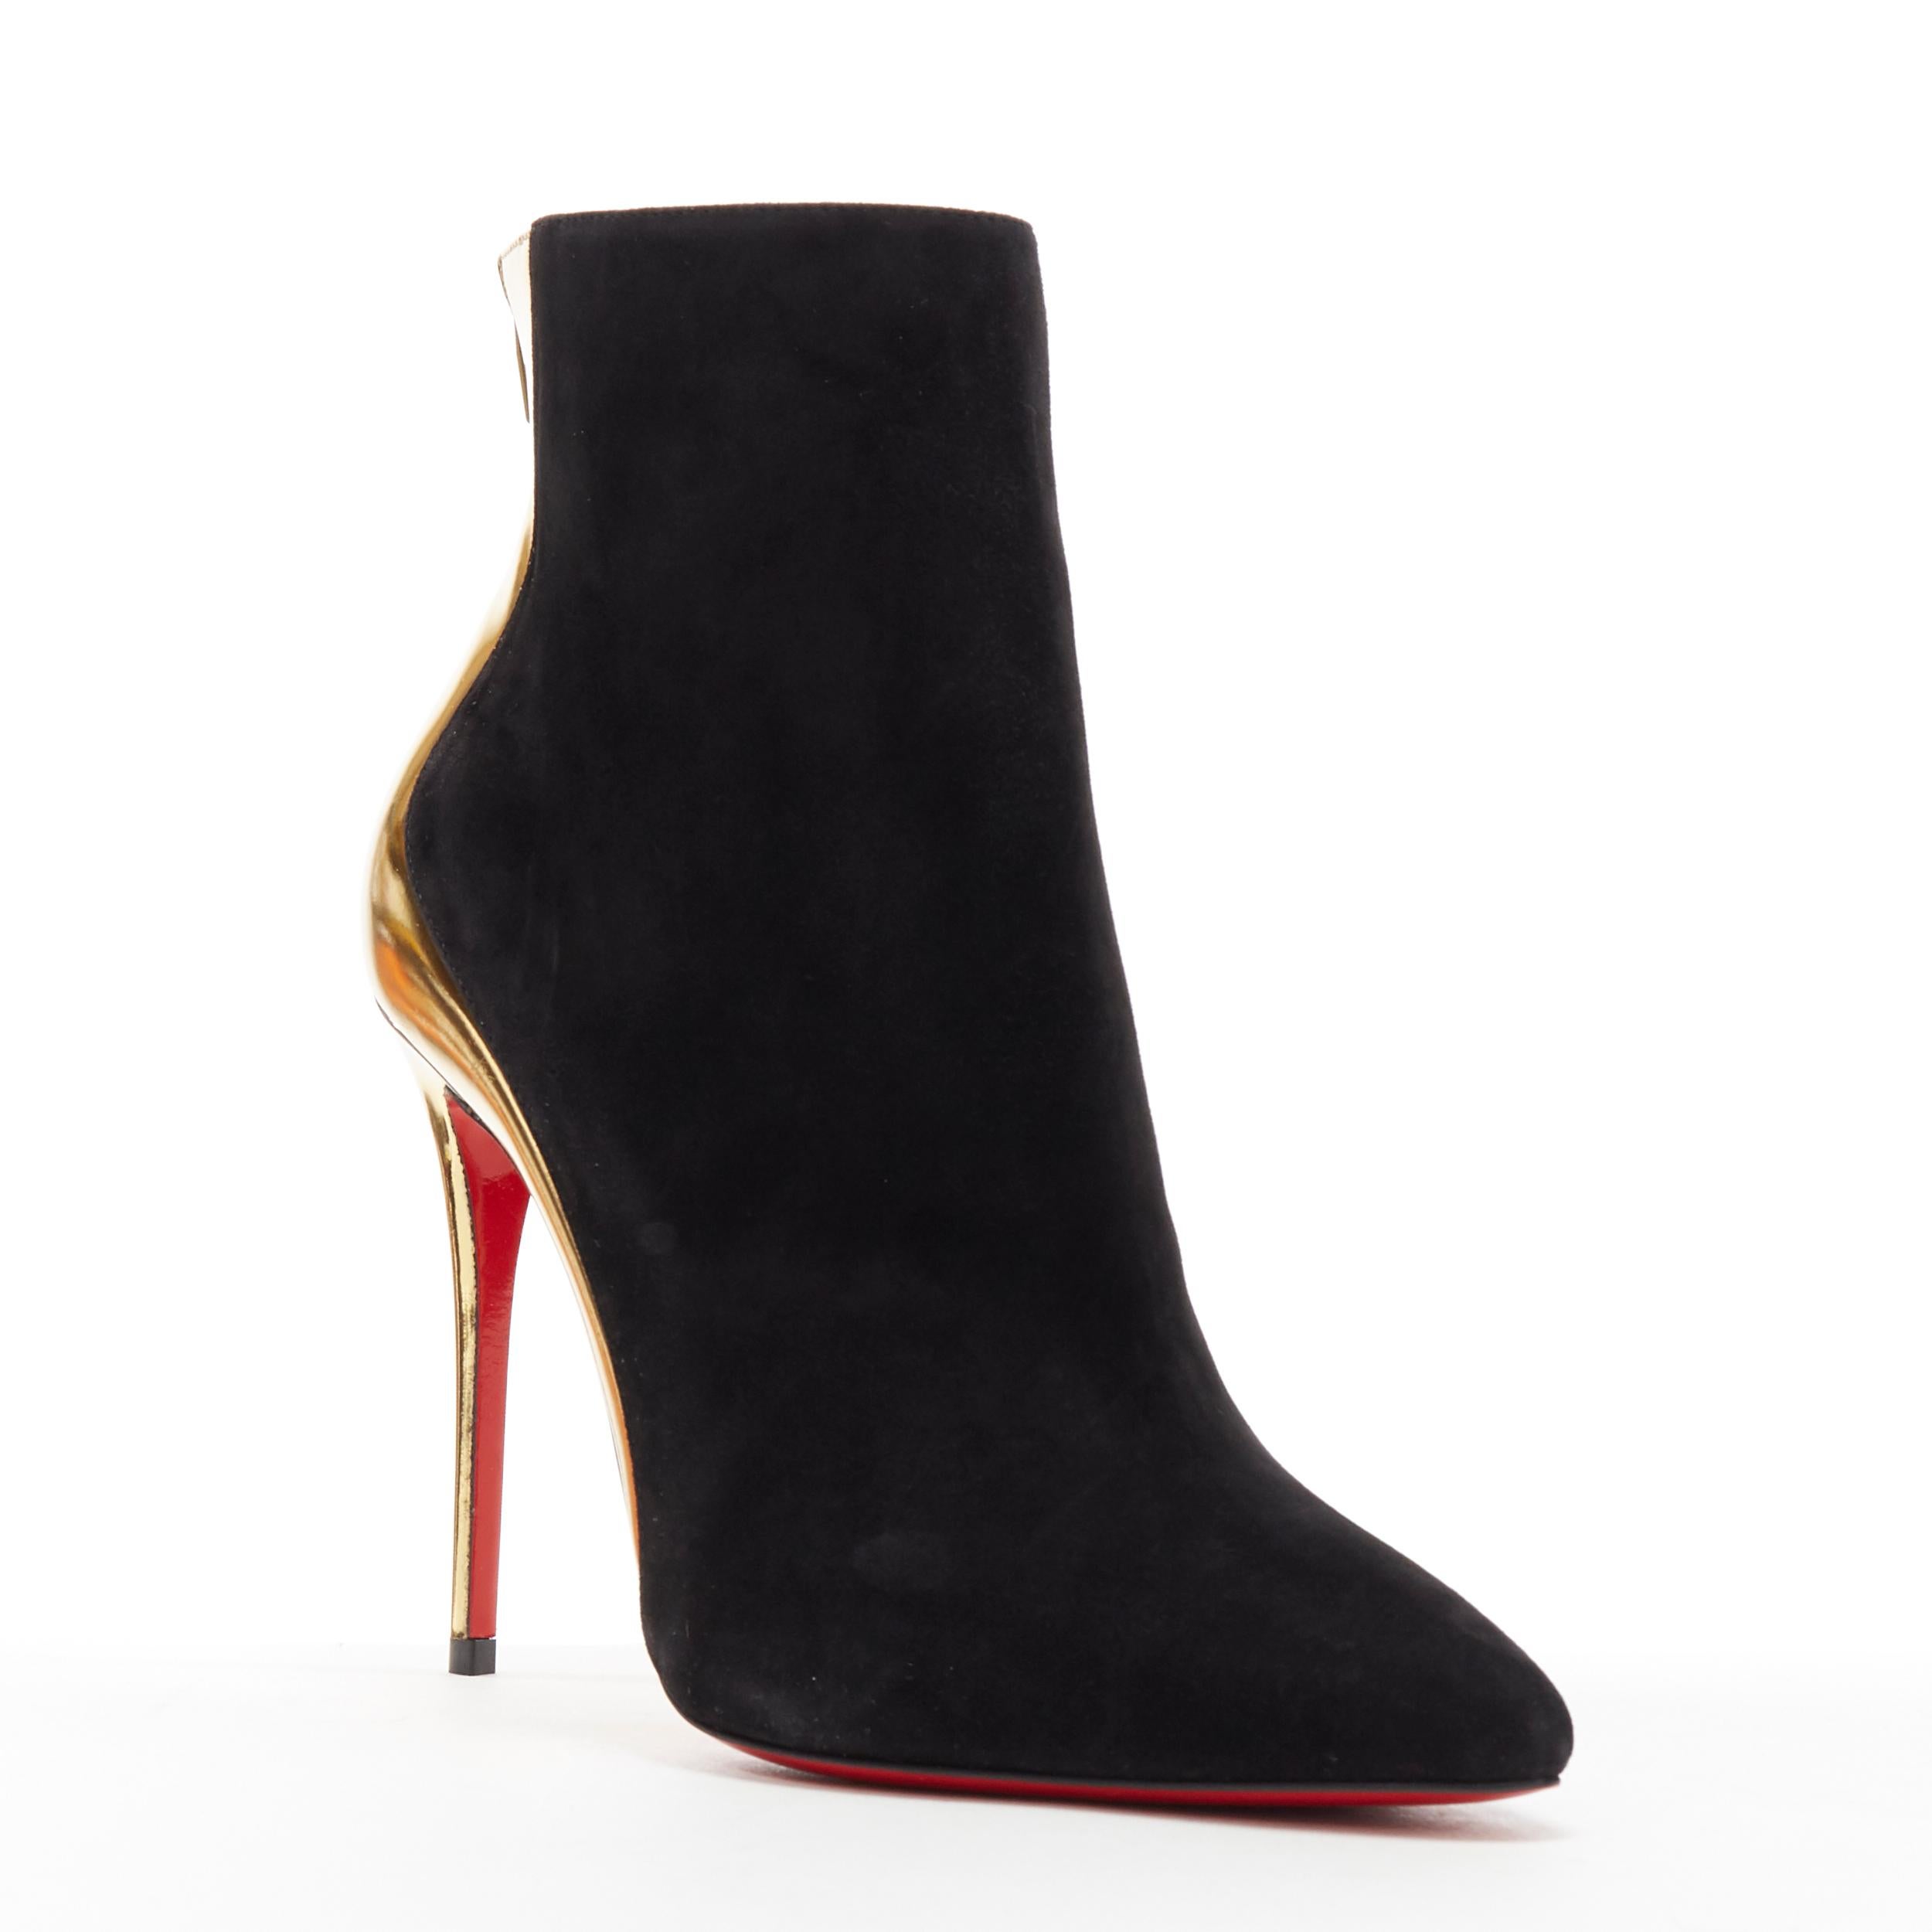 new CHRISTIAN LOUBOUTIN Delicotte 100 black suede gold mirrored heel bootie EU36
Brand: Christian Louboutin
Designer: Christian Louboutin
Model Name / Style: Delicotte 100
Material: Suede
Color: Black
Pattern: Solid
Closure: Zip
Extra Detail: Style